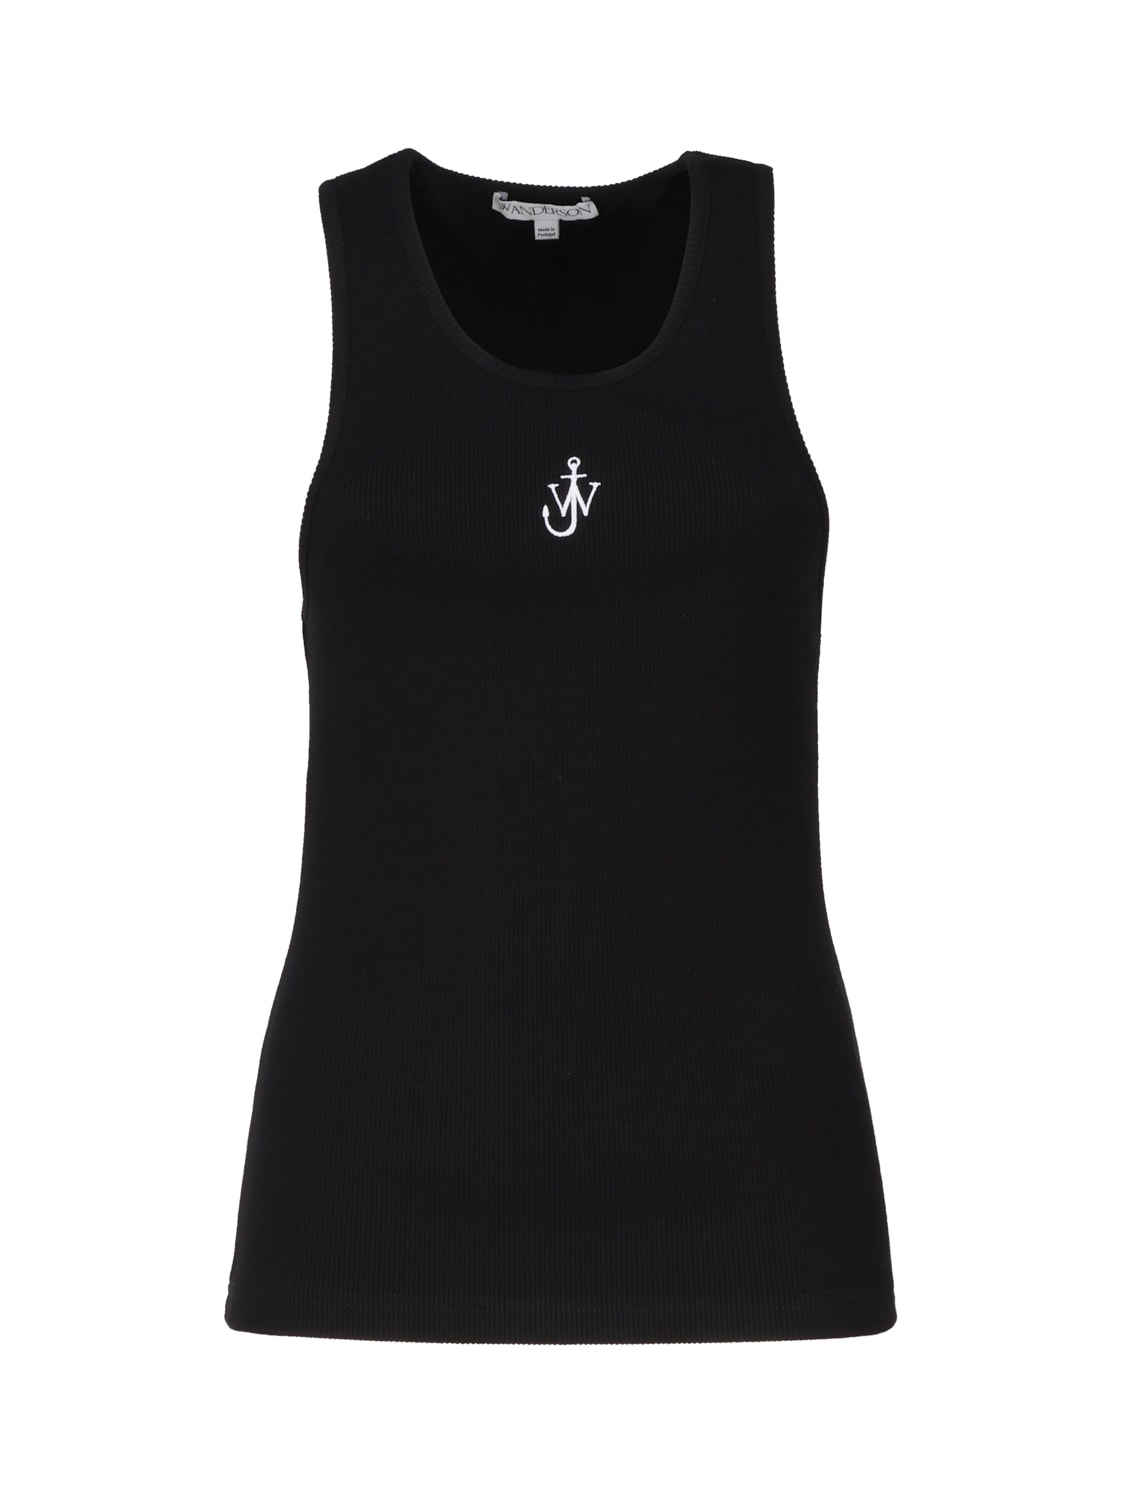 J.W. Anderson Tank Top With Embroidery